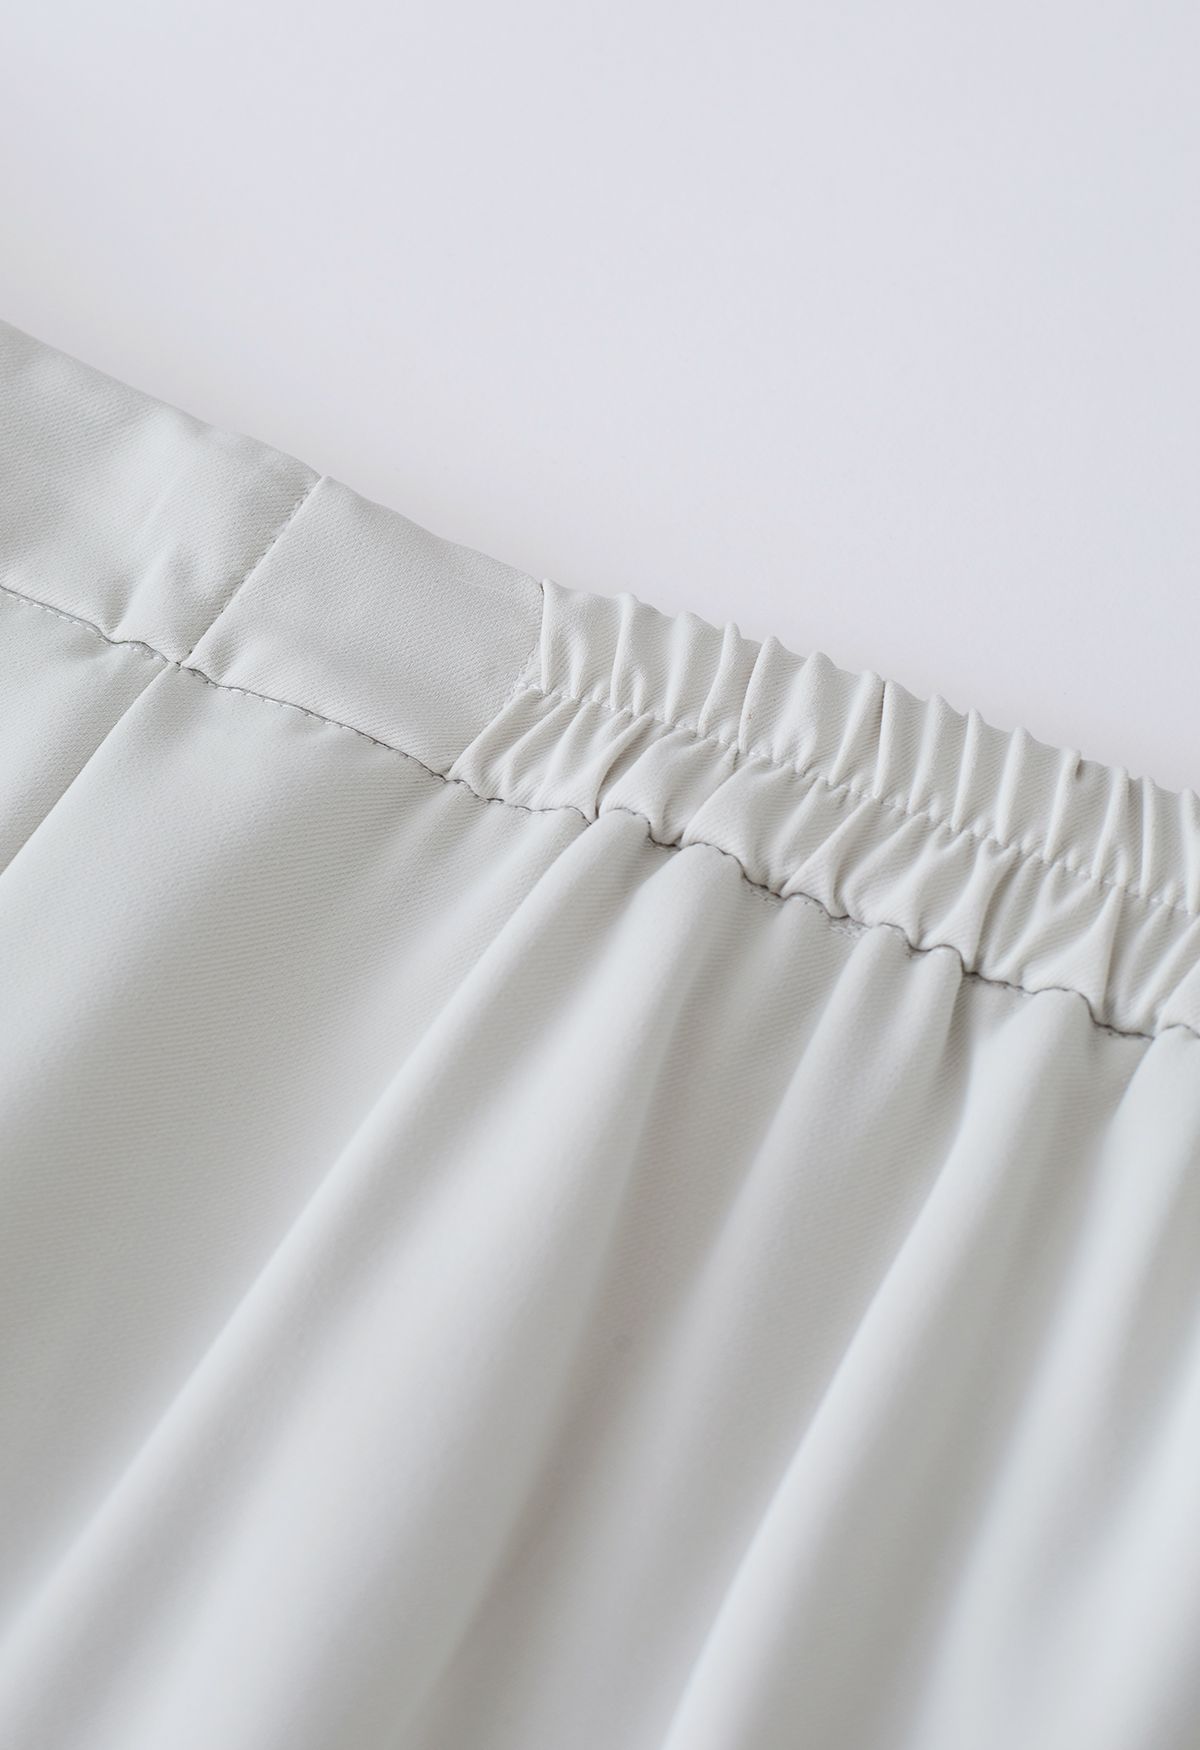 Drawstring Waist Pleated Detailing Pants in Ivory